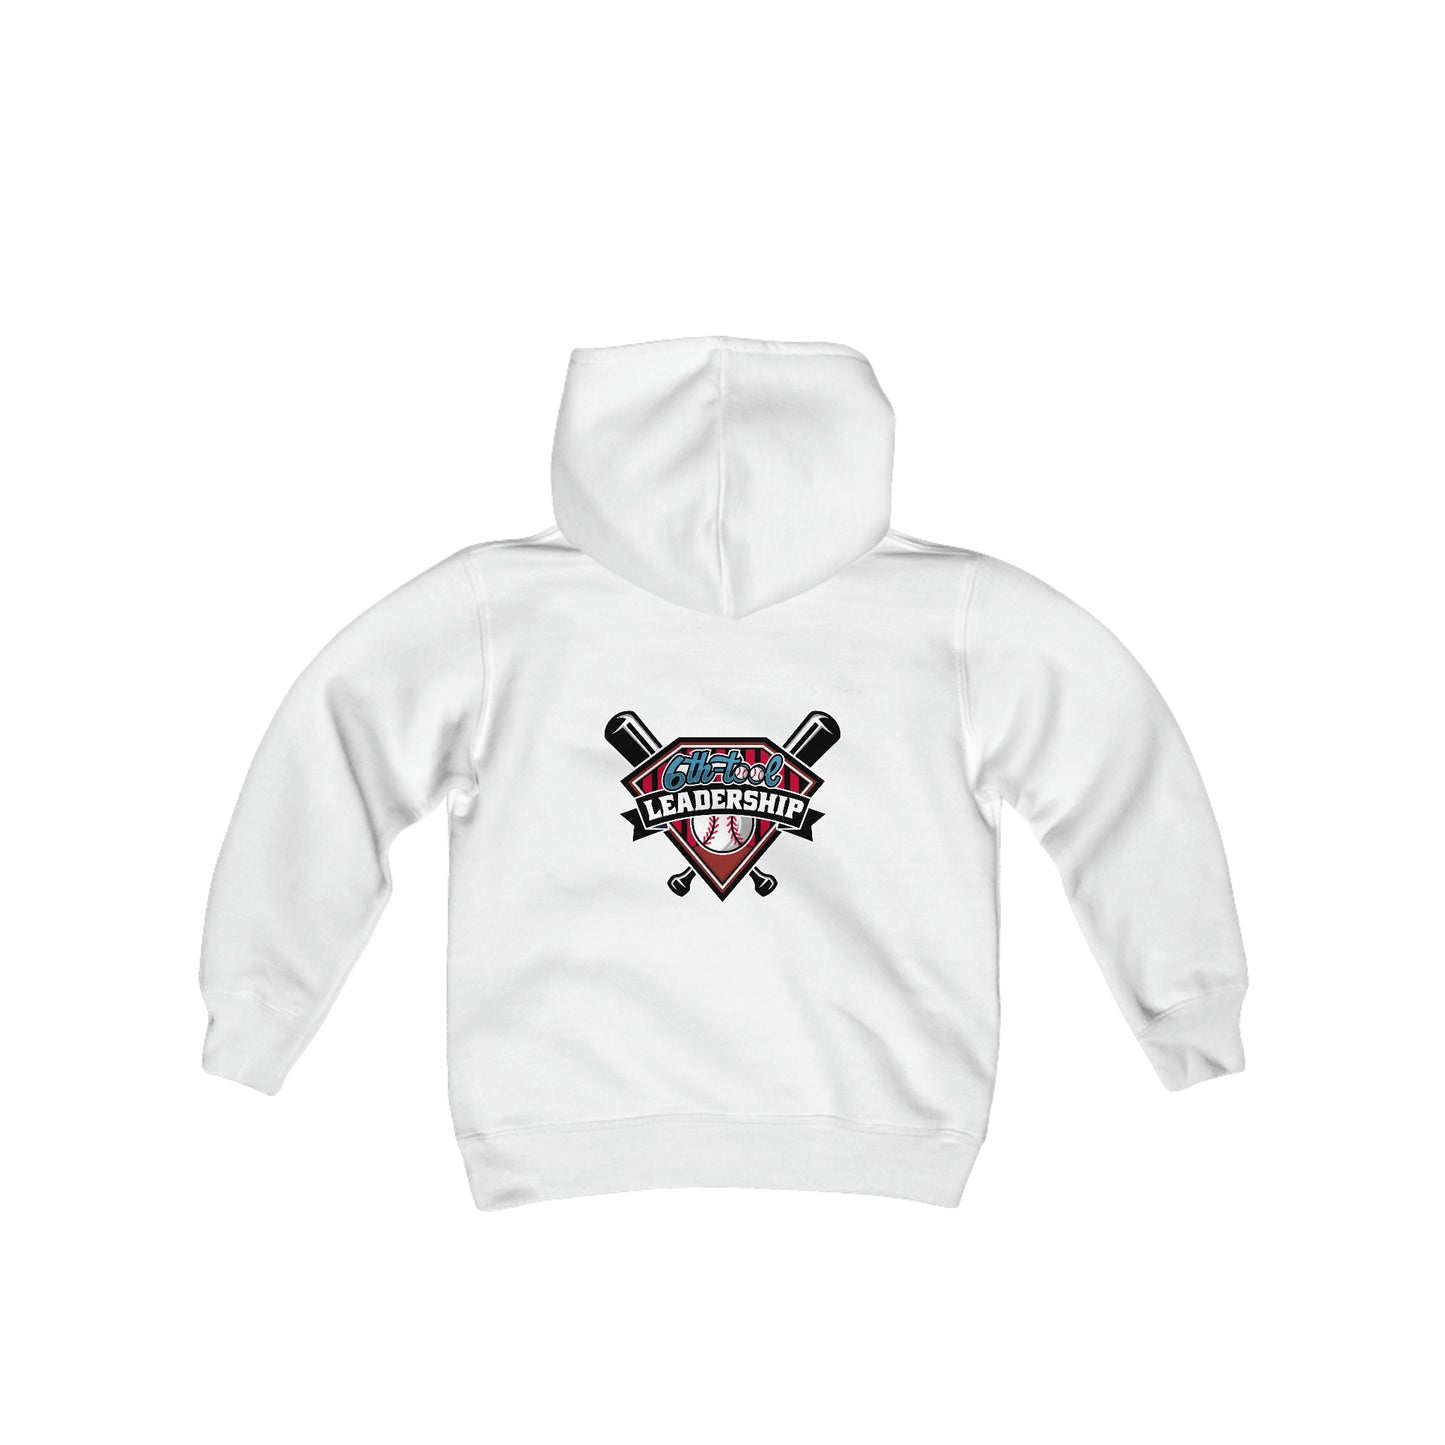 6th-Tool Solid Script Youth Hoodie